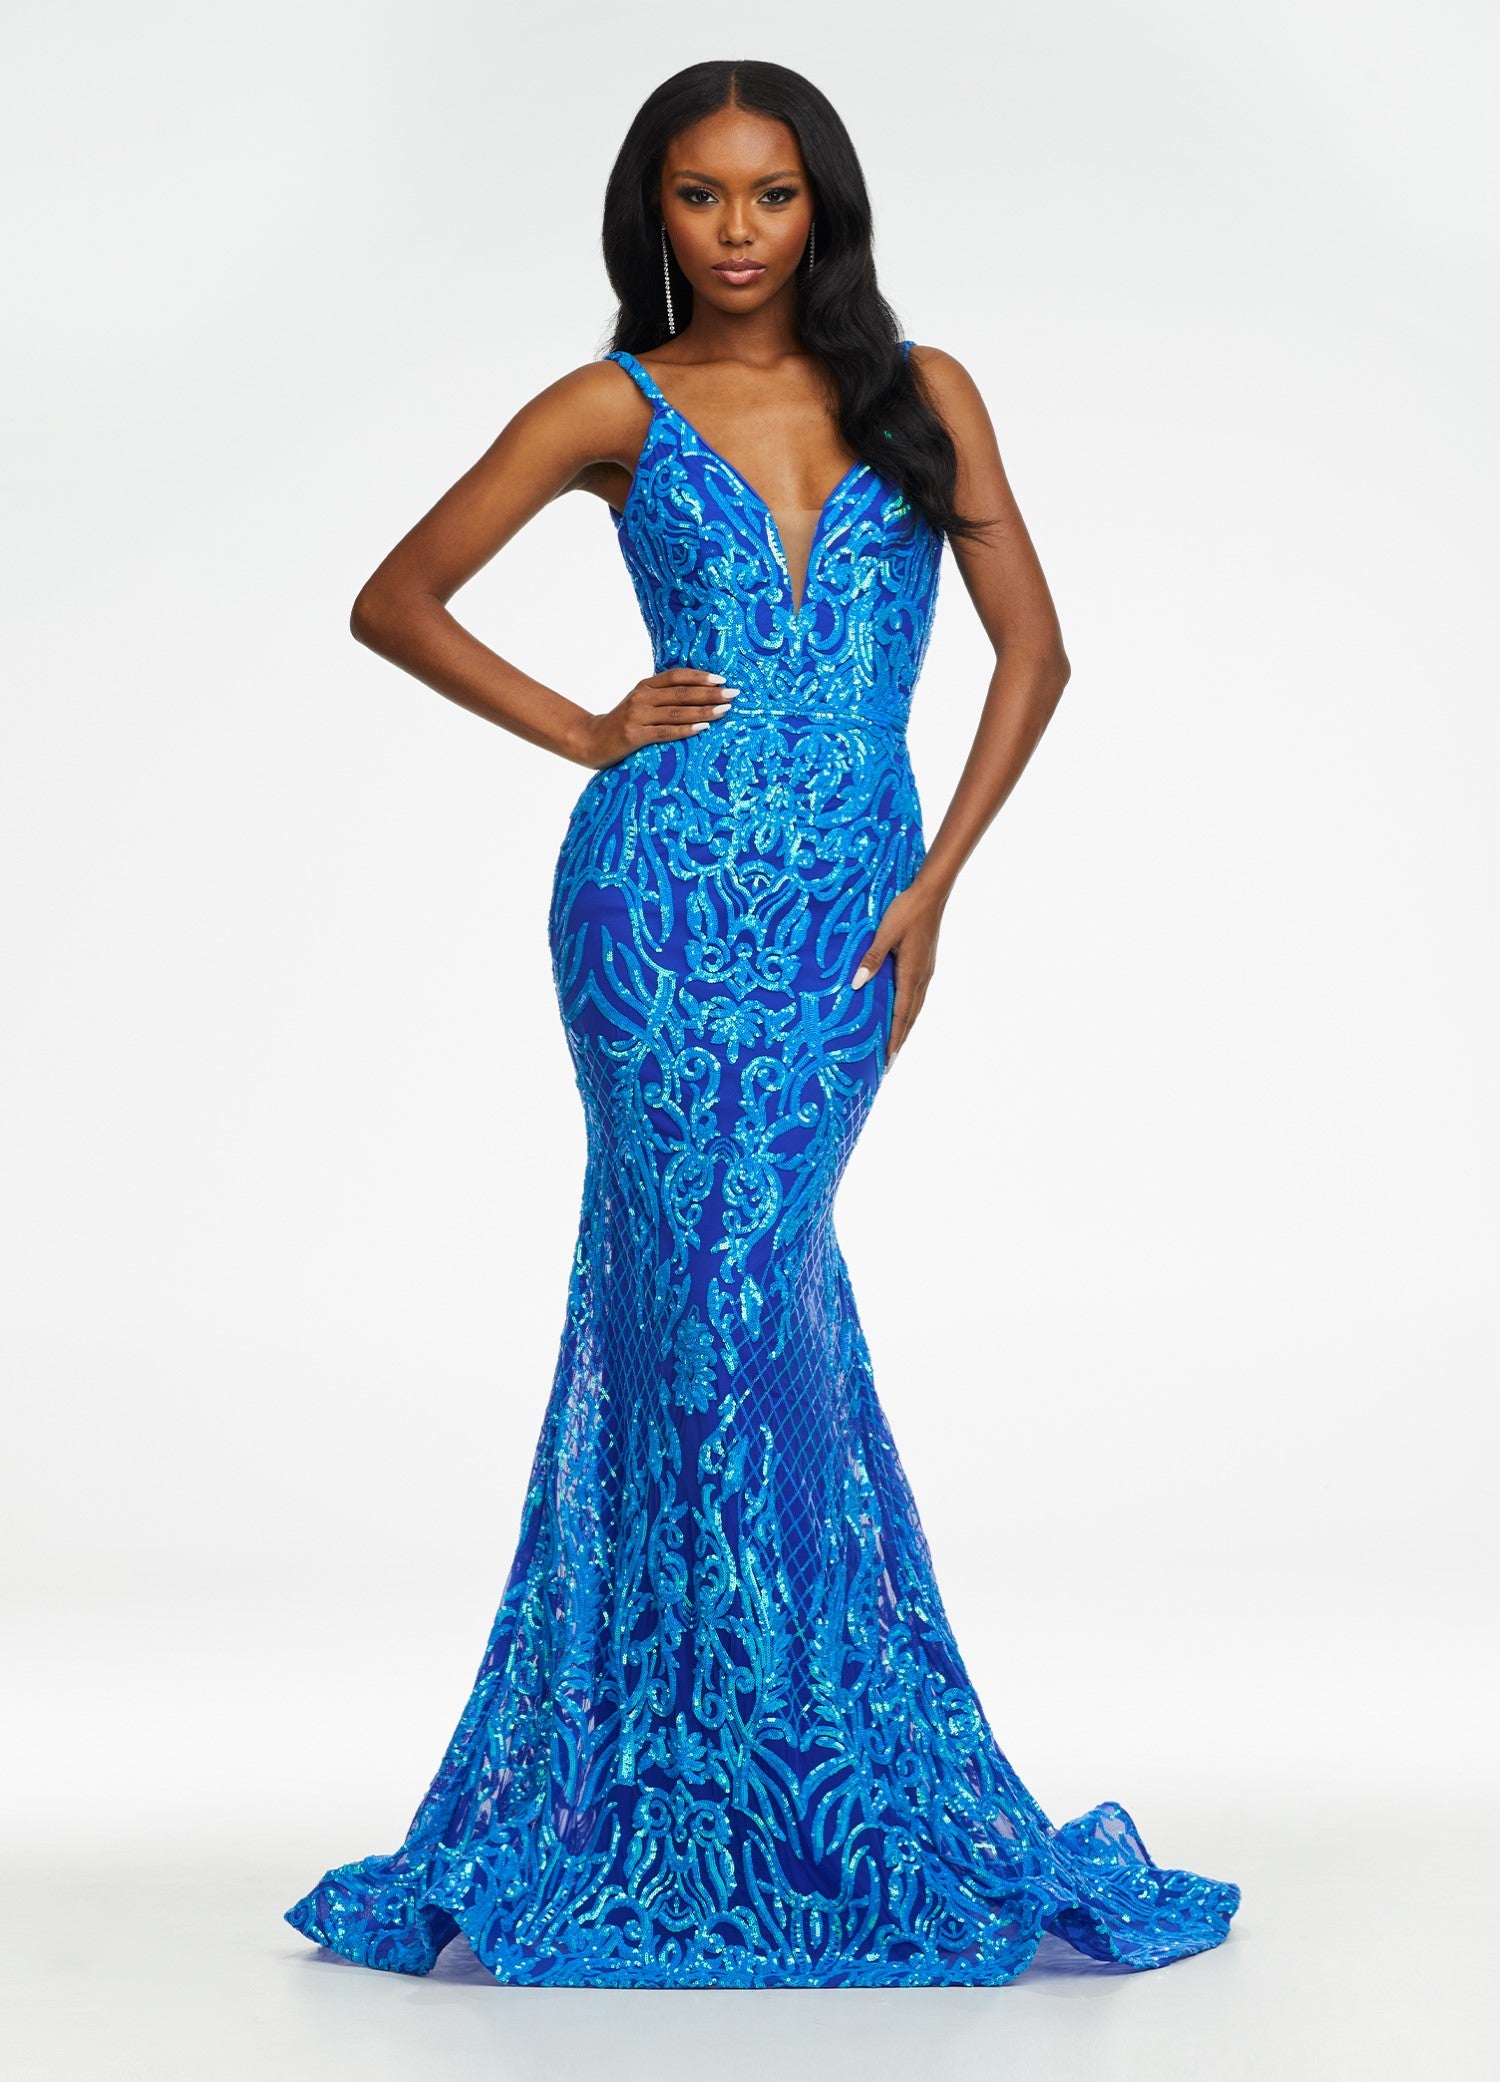 Ashley Lauren 11342 Long Prom Sequin Spaghetti Strap Prom Dress with Lace Up Back Formal Pageant 14 / Gold